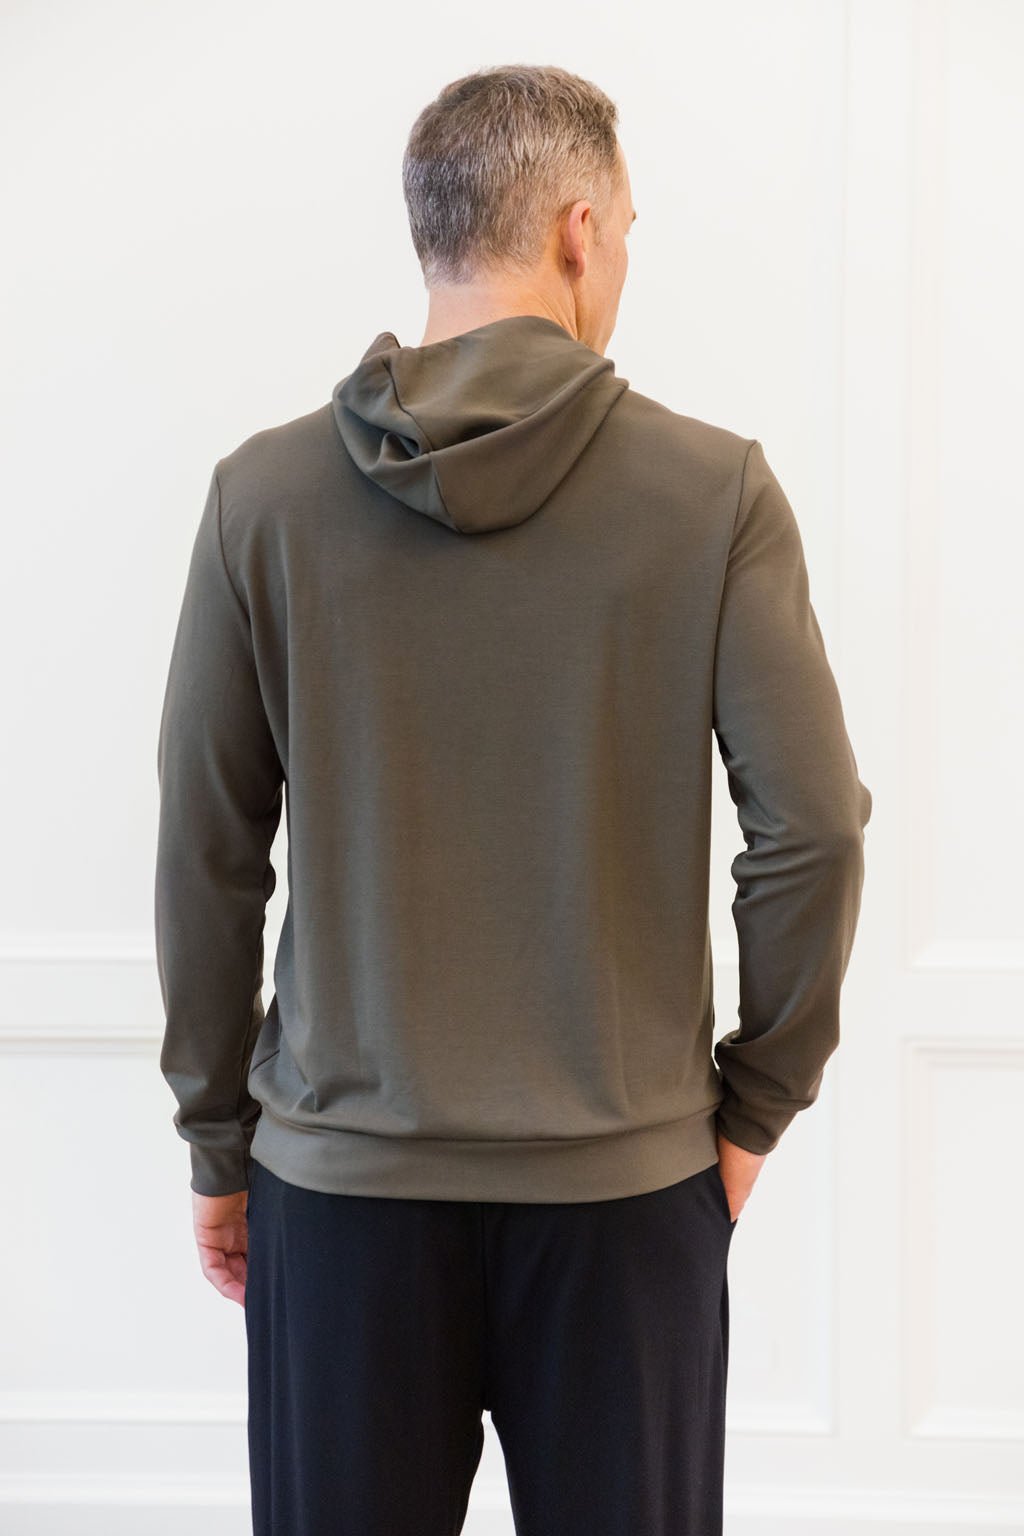 Hunter Bamboo Hoodie worn by man standing in front of white background with his back facing the camera.